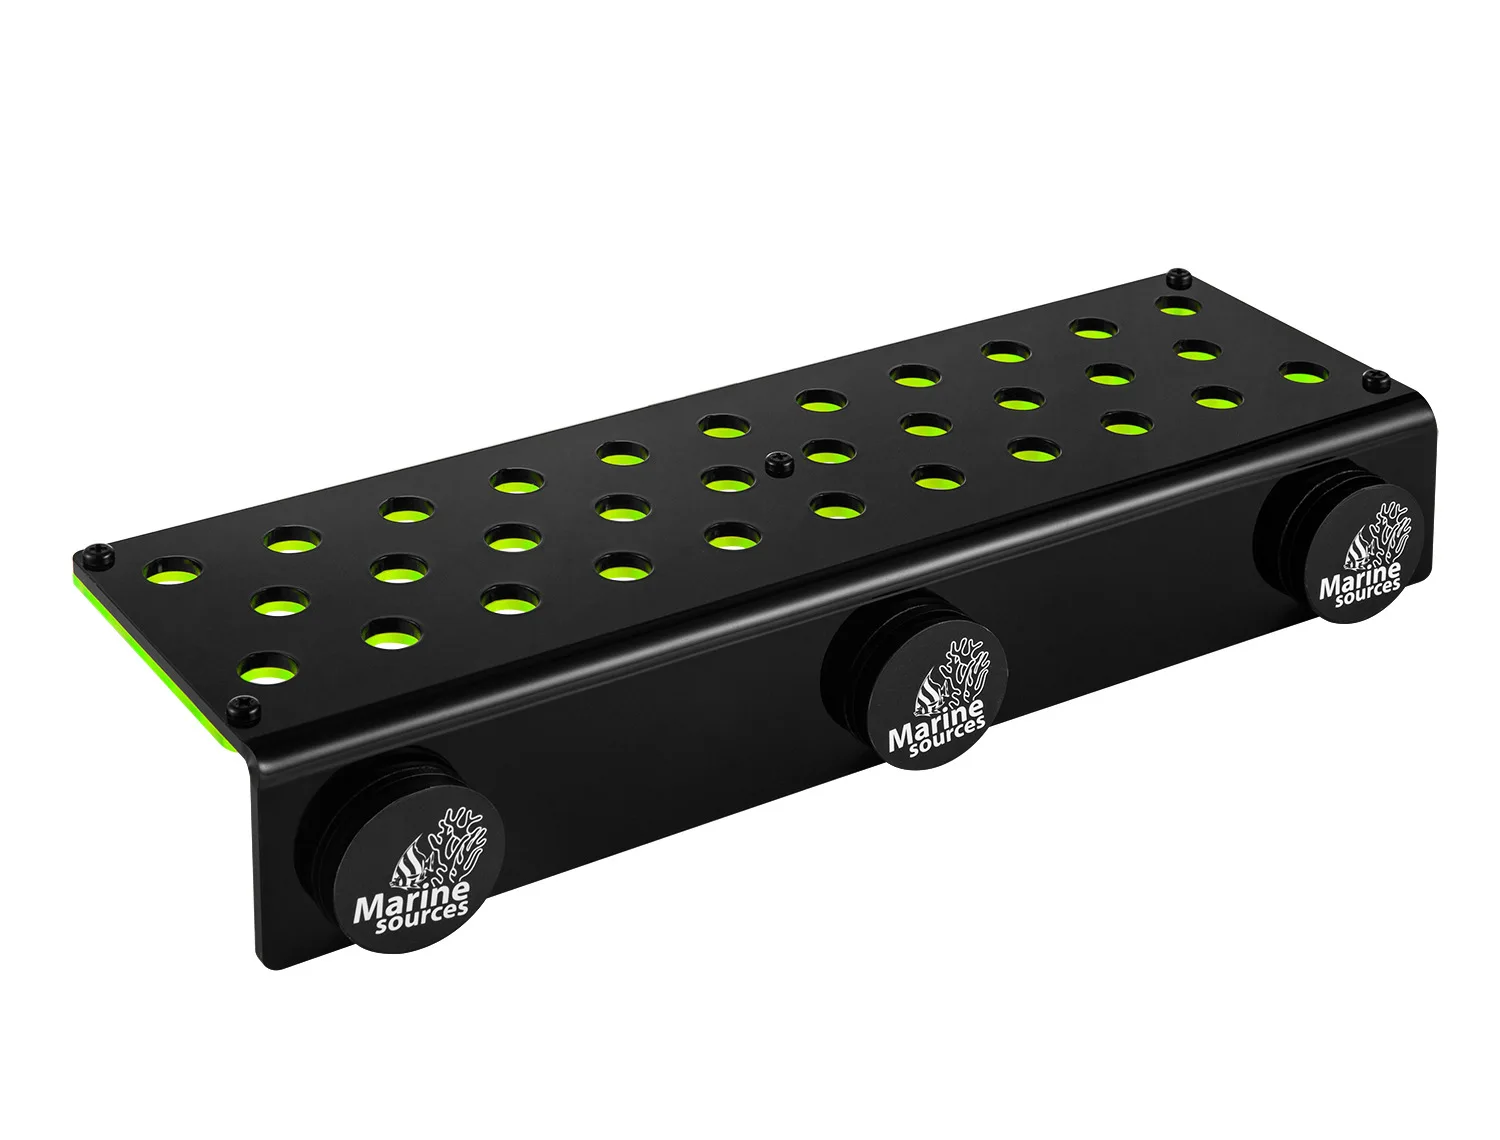 Marine Sources Fish Tank Strong Magnetic Suction Fluorescent Green 32 -holes Dark Coral SPS Bracket Suspended Luminous Acrylic